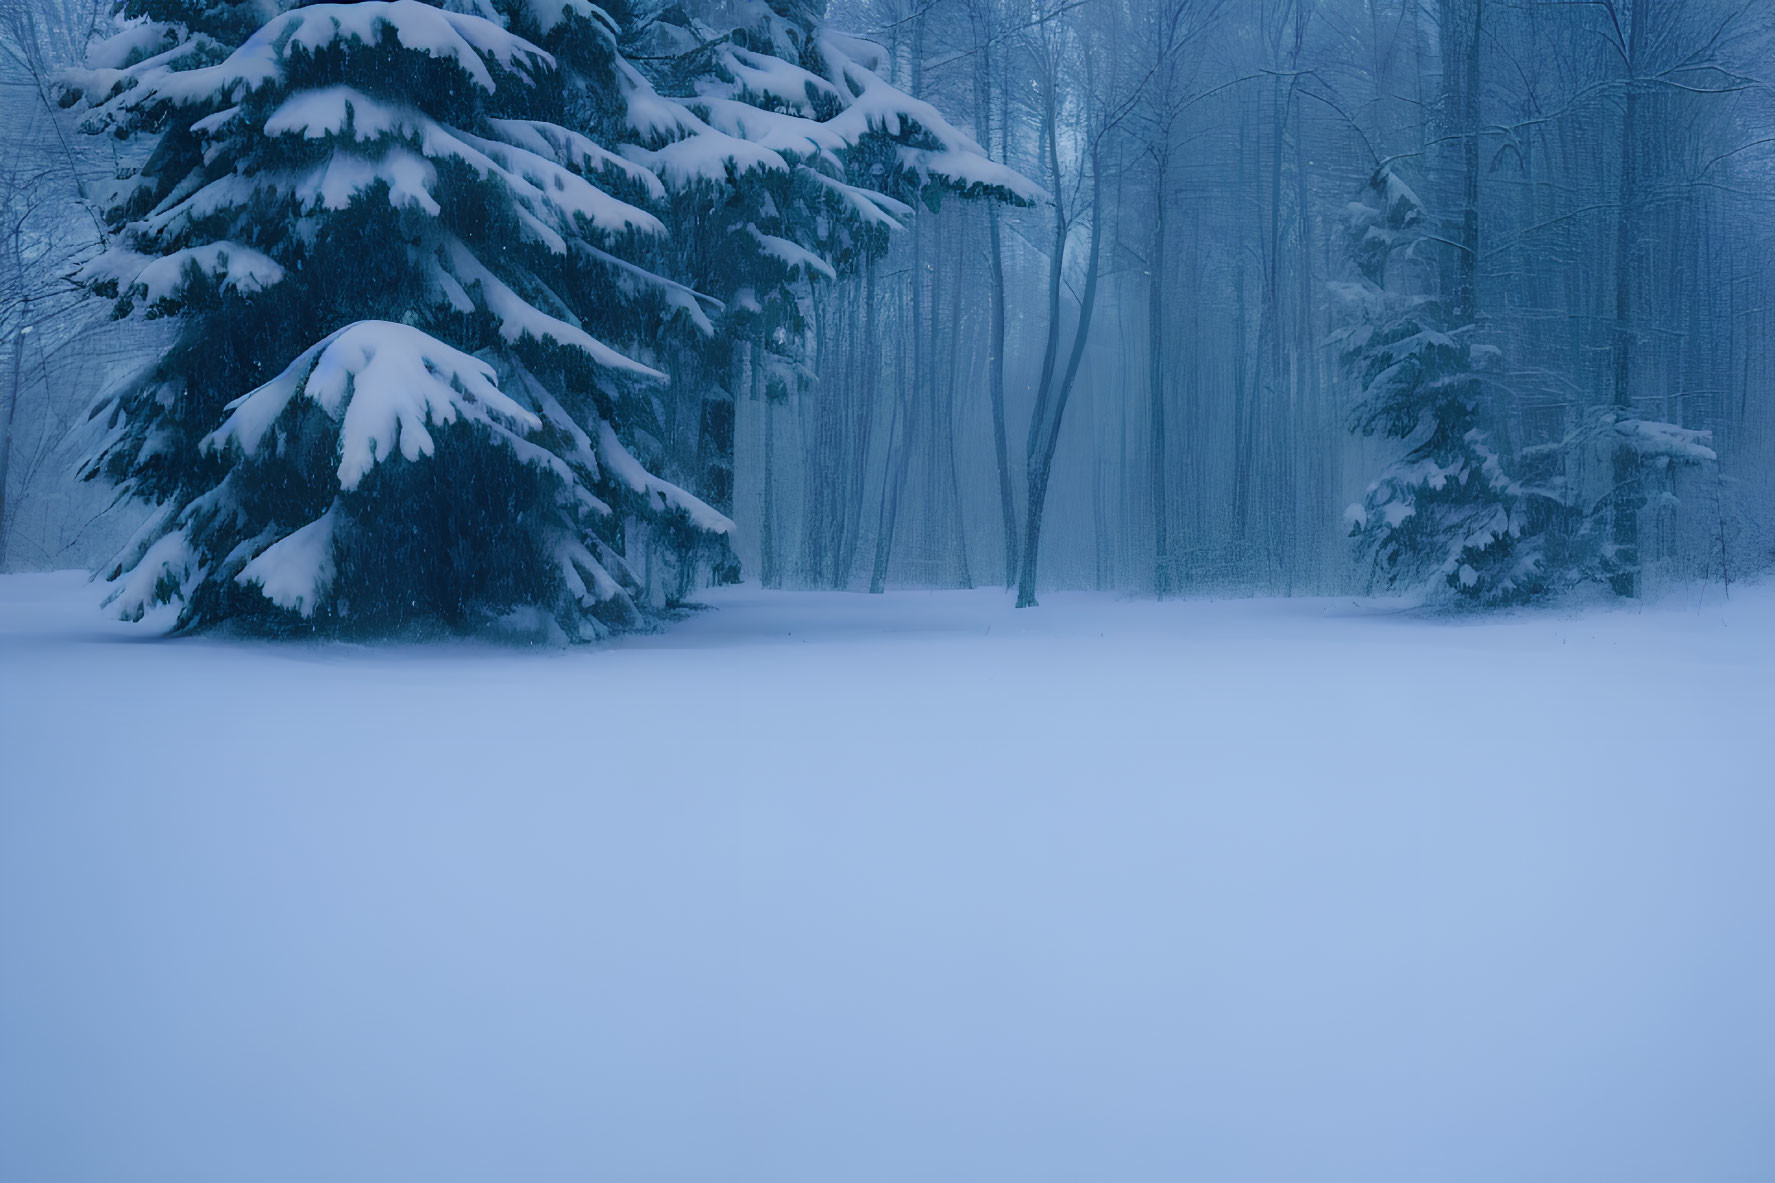 Serene winter forest with snow-covered trees and misty blue atmosphere